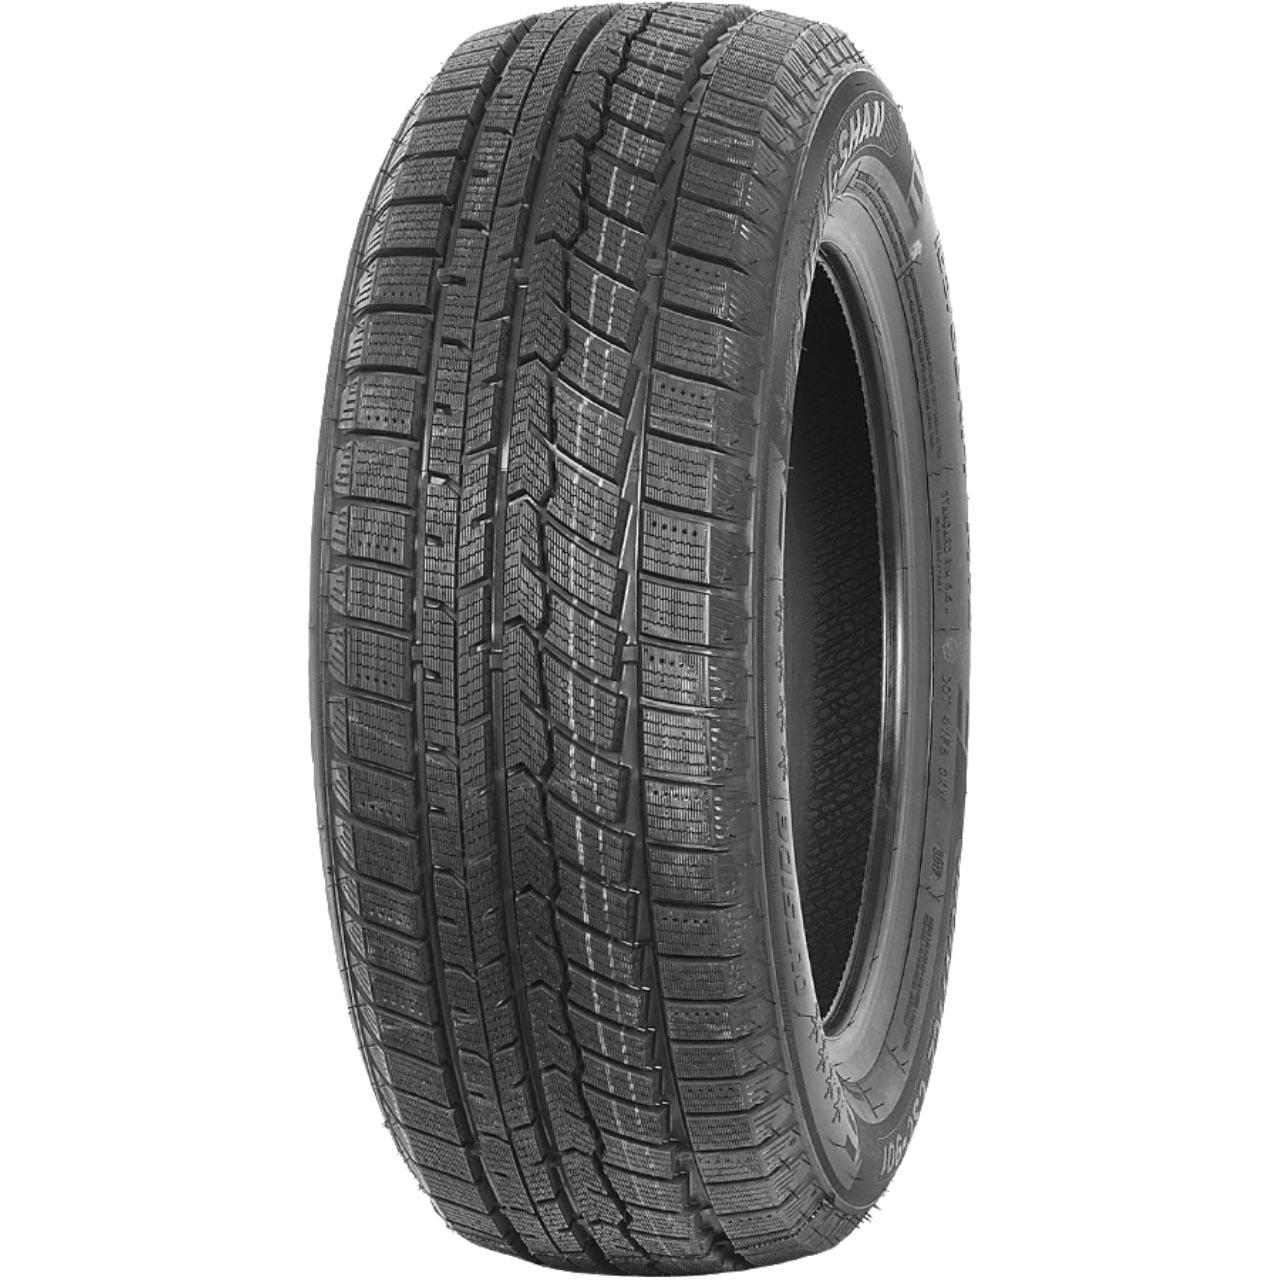 CHENGSHAN MONTICE CSC-901 215/60R16 99H